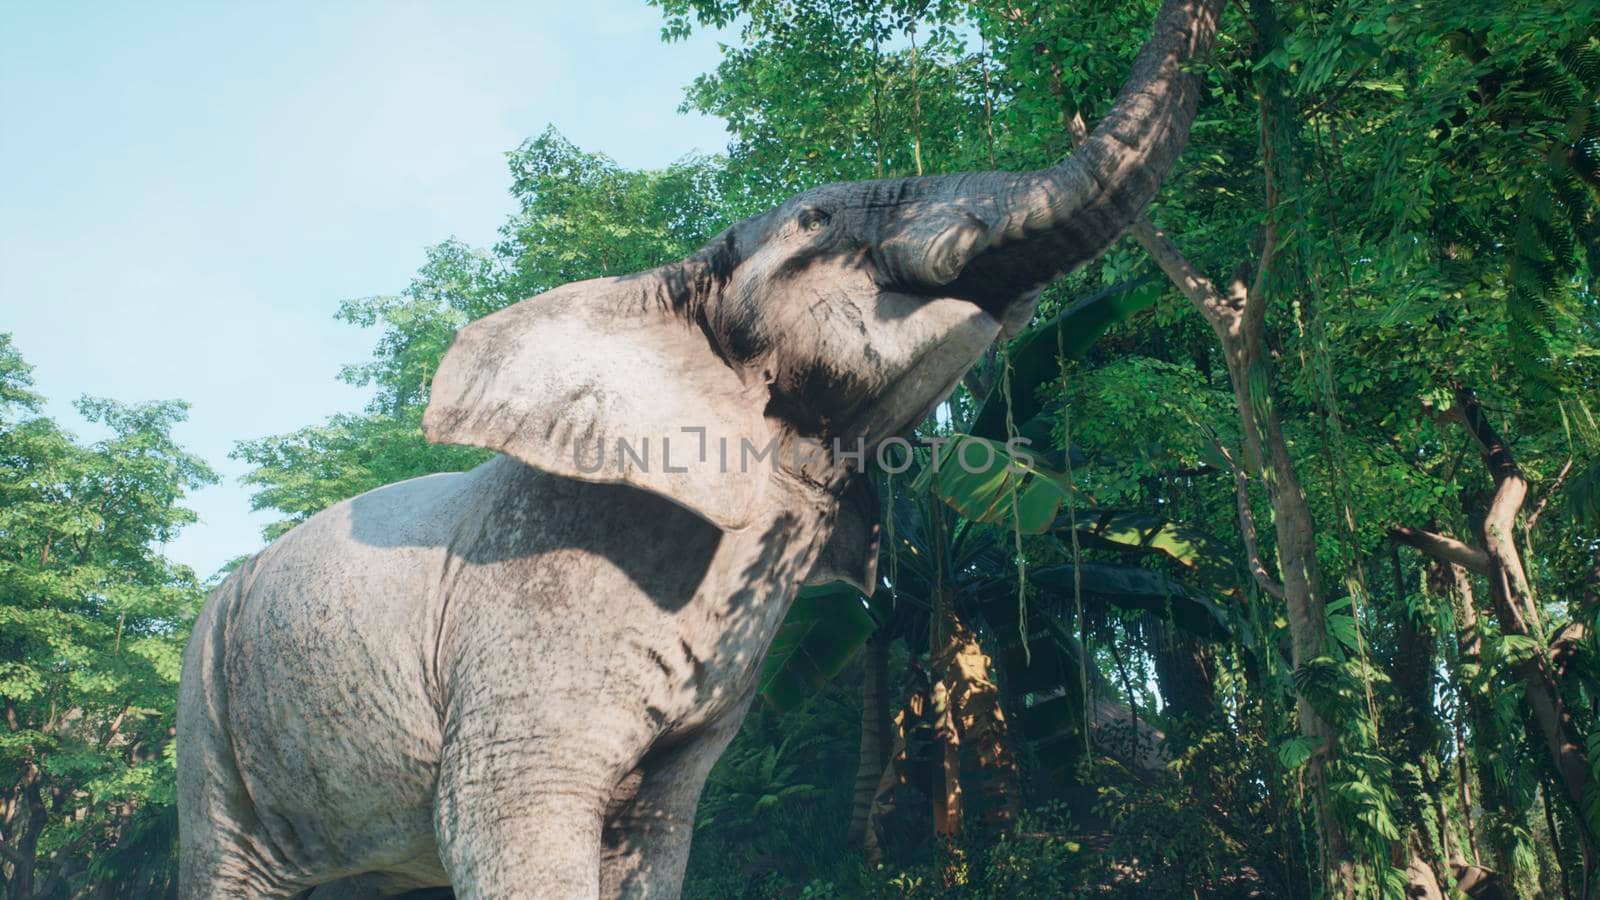 Large gray African elephant in the jungle eats foliage from trees. A look at the African jungle.